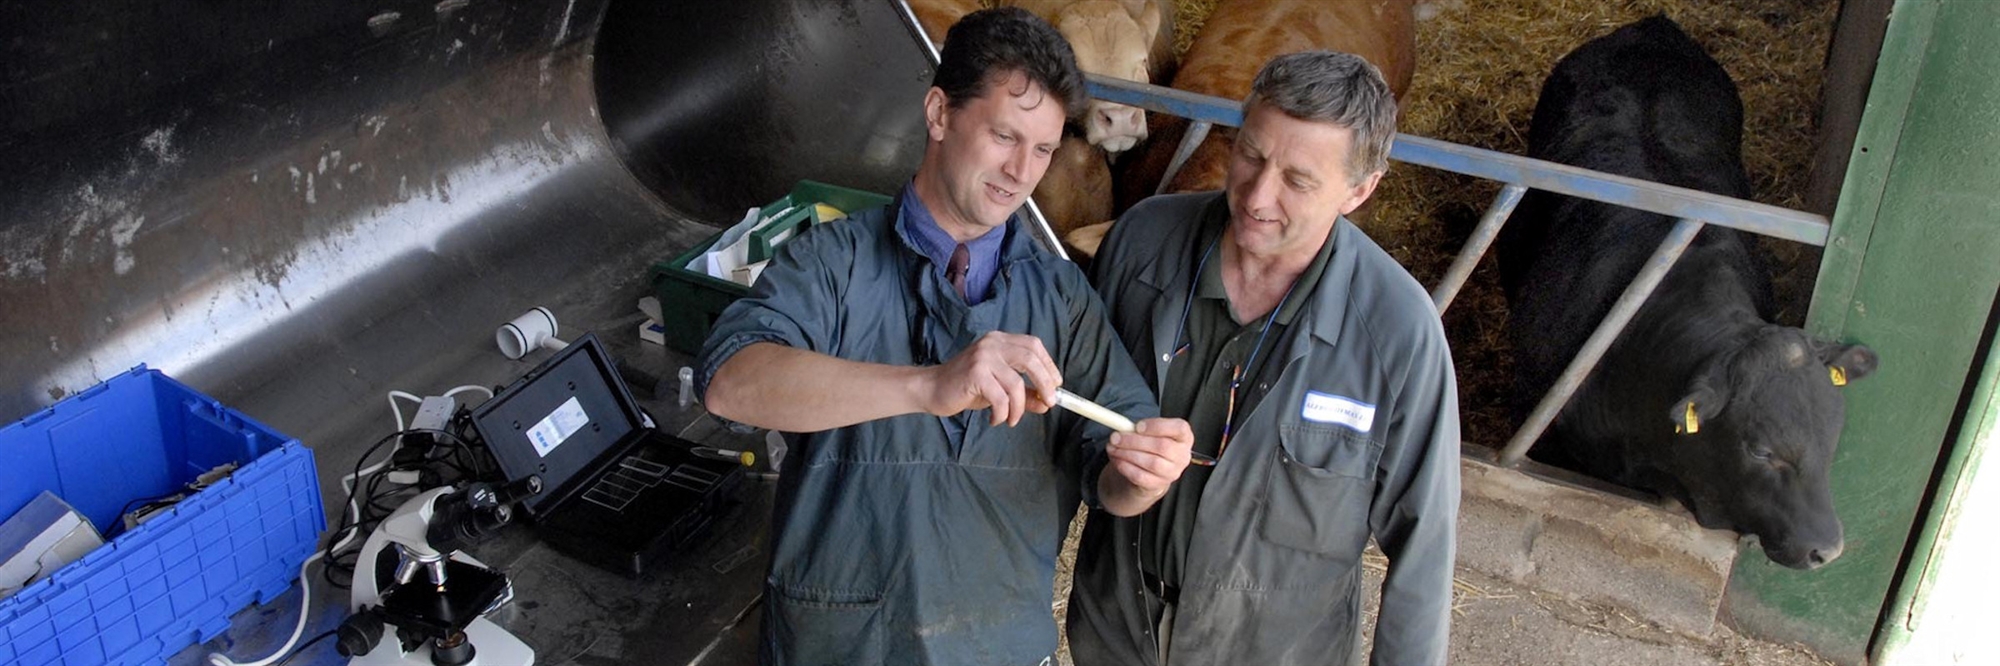 Vet farmers discuss test results in front of some cows